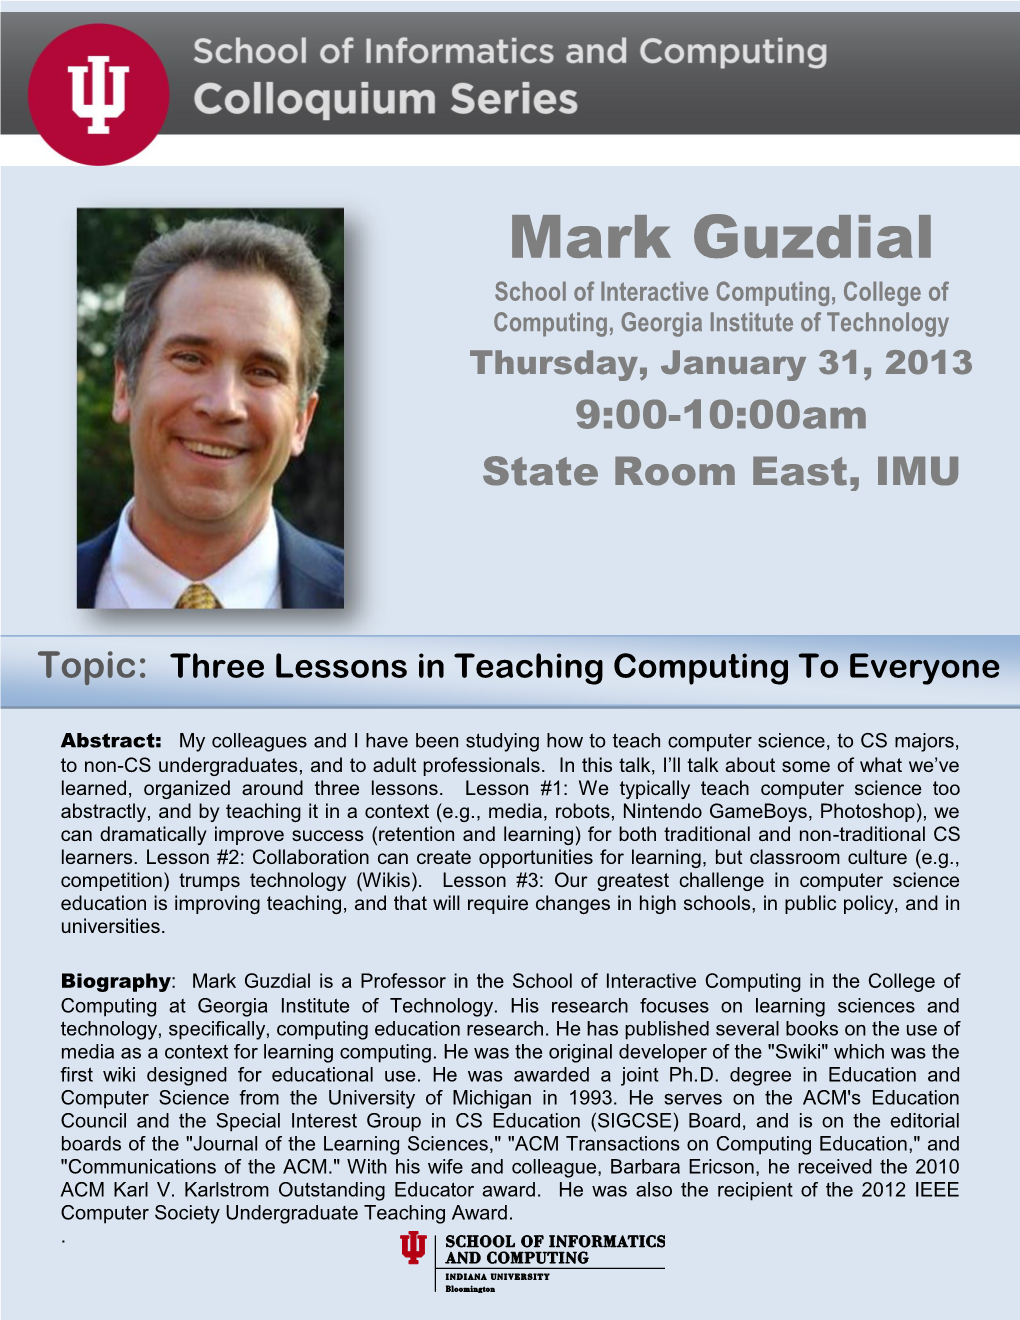 Mark Guzdial School of Interactive Computing, College of Computing, Georgia Institute of Technology Thursday, January 31, 2013 9:00-10:00Am State Room East, IMU